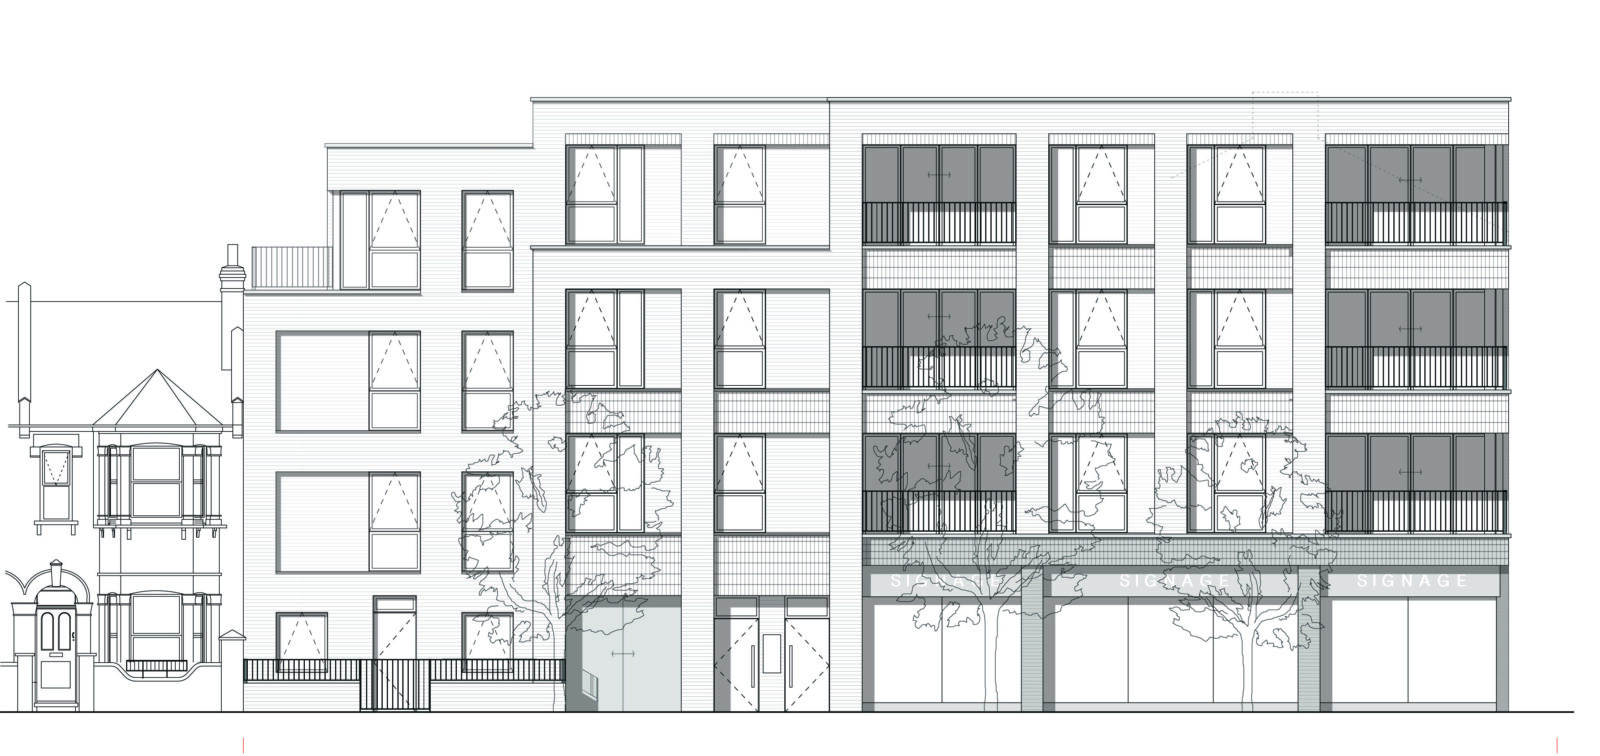 Proposed front elevation from street